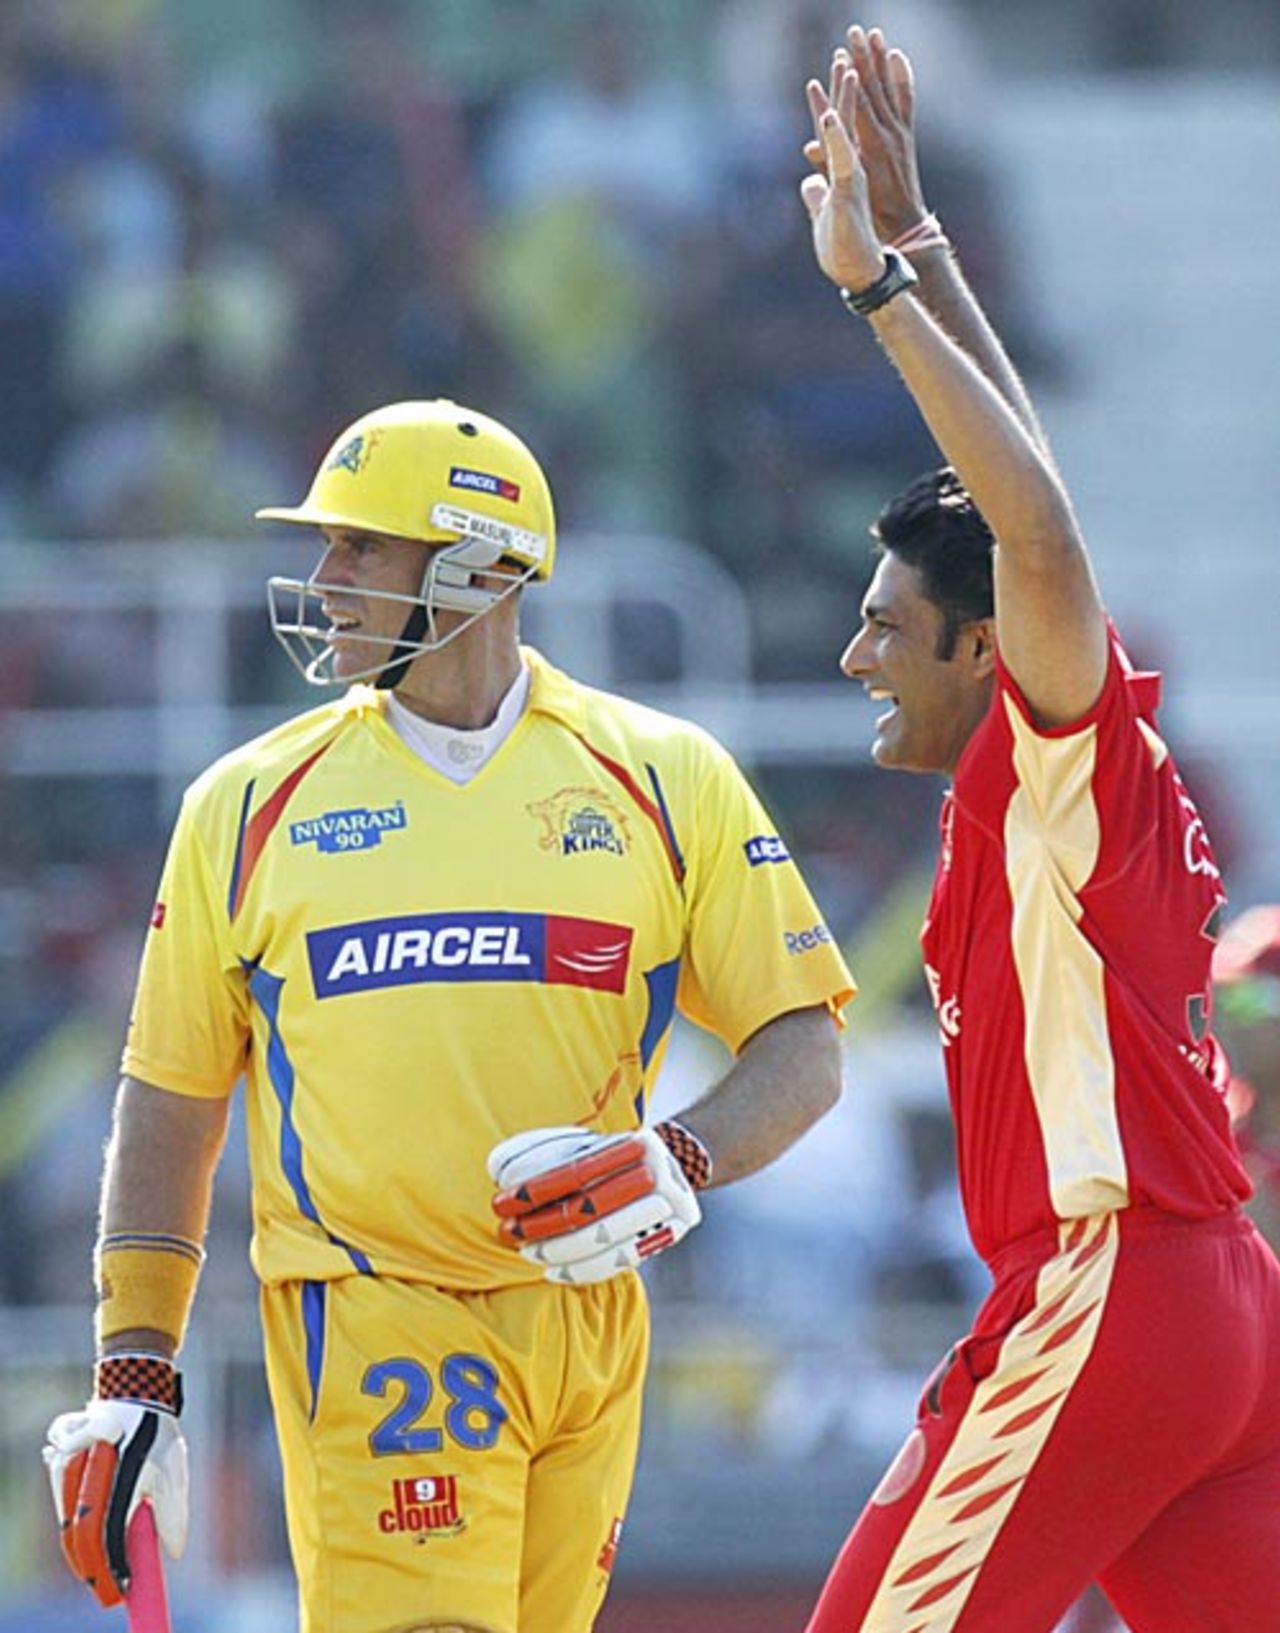 Matthew Hayden holes out in the deep and Anil Kumble celebrates, Chennai Super Kings v Royal Challengers Bangalore, IPL, Durban, May 14, 2009